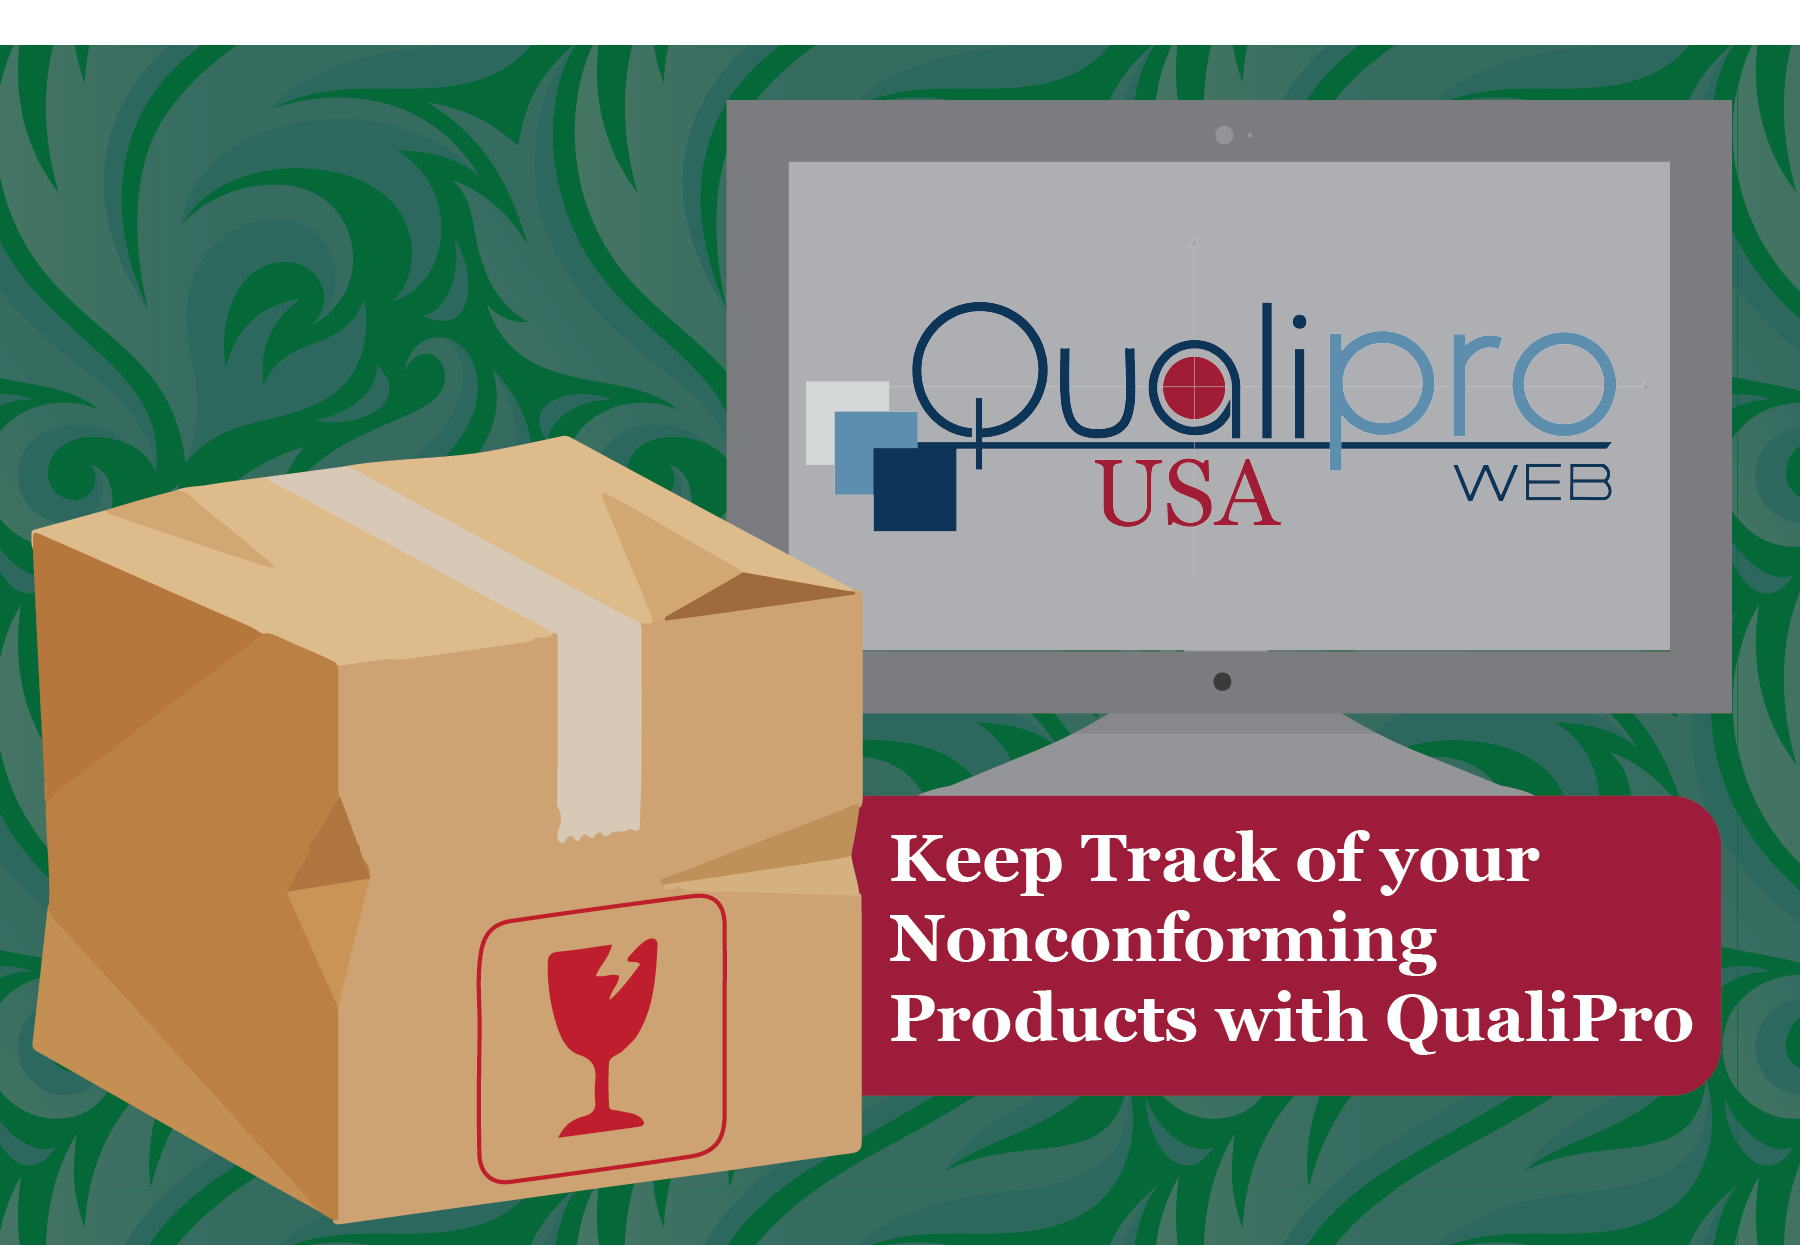 Keep Track of your Nonconforming Products with QualiPro